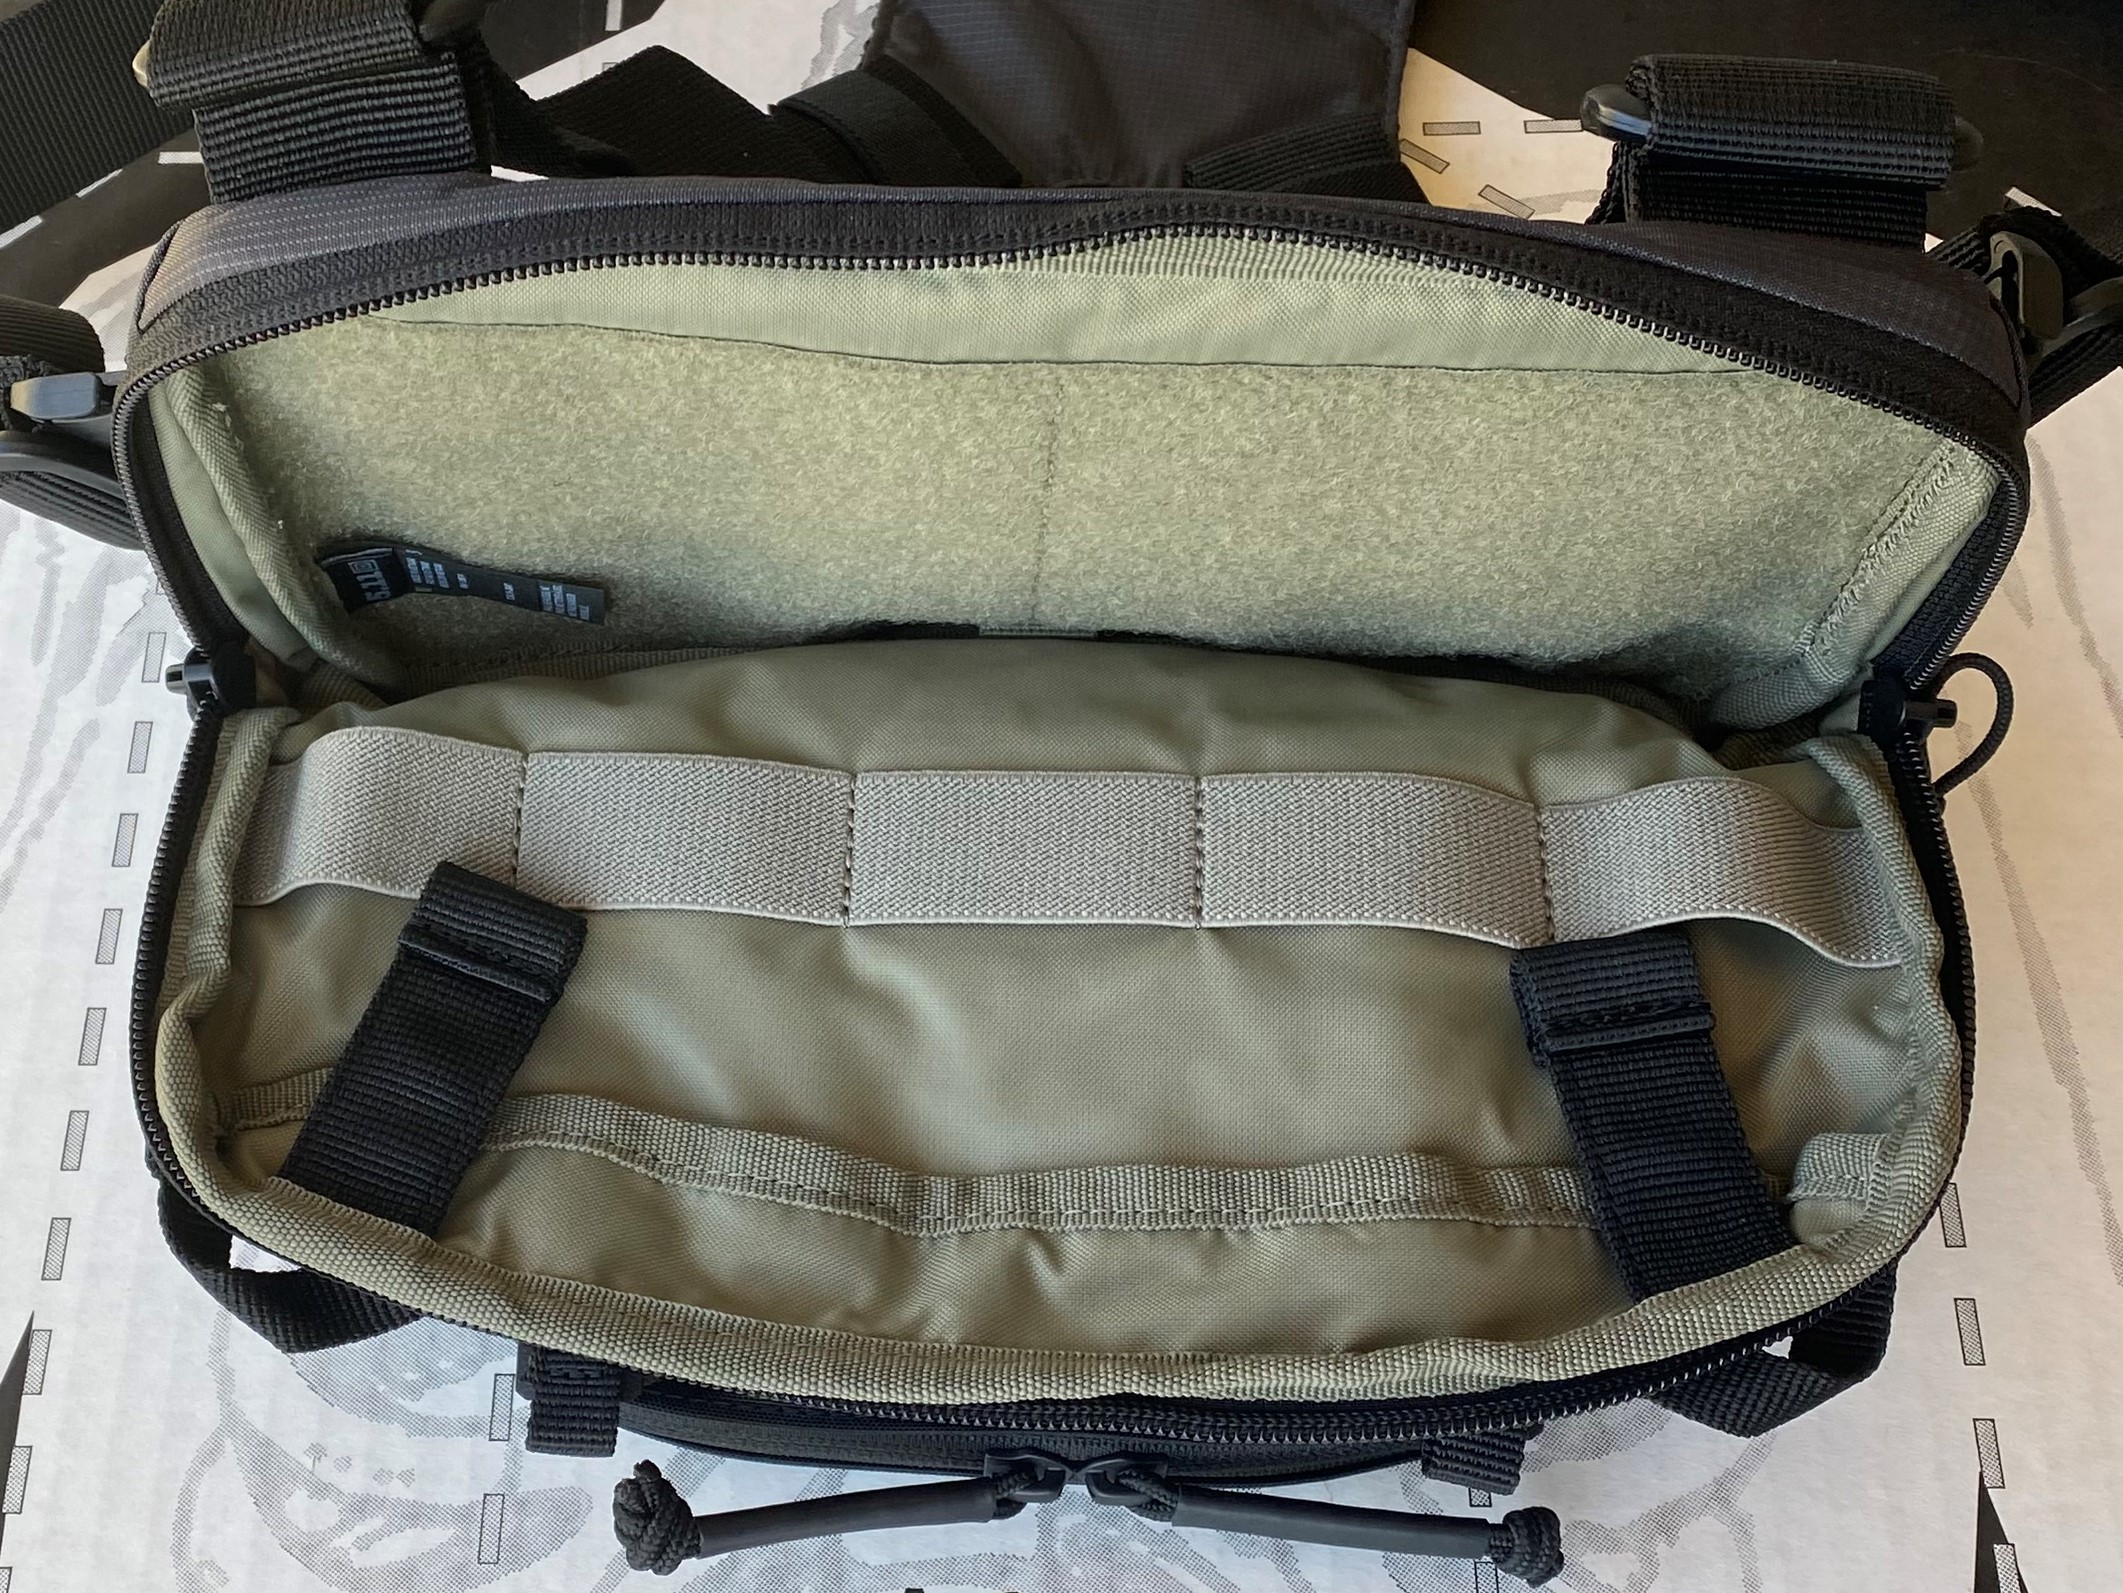 Skyweight Utility Chest Pack